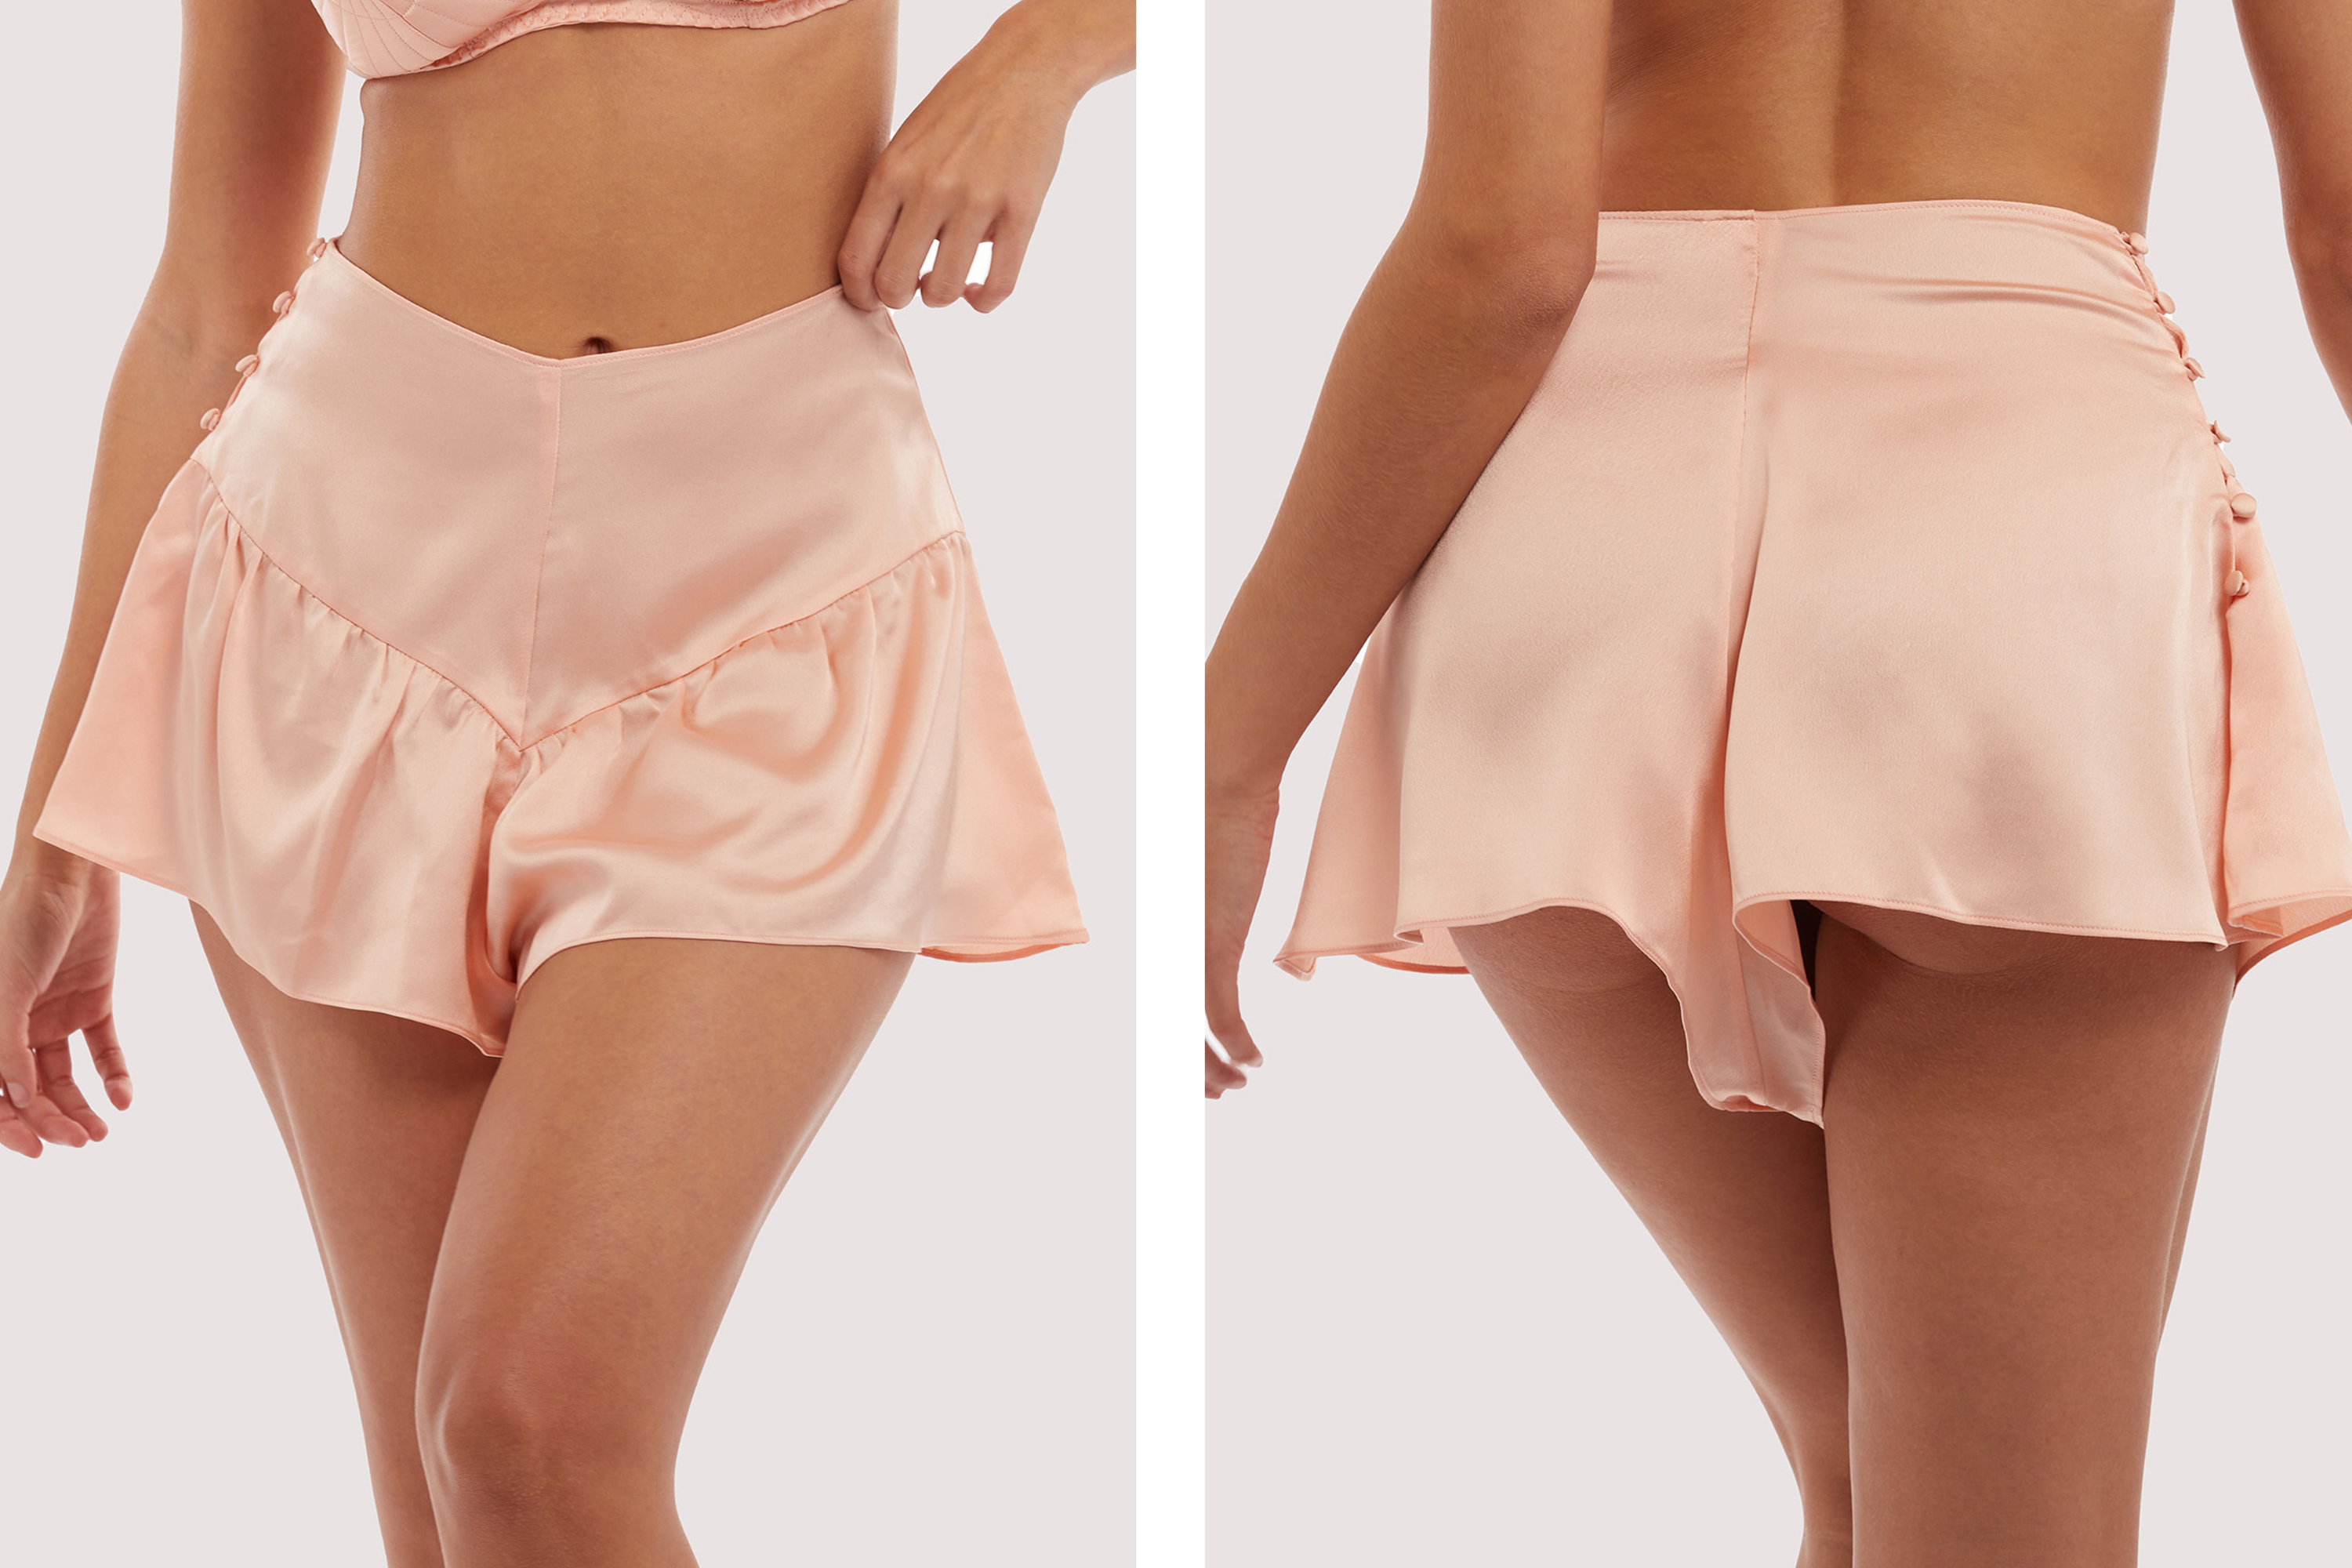 peach satin french knickers vintage knickers